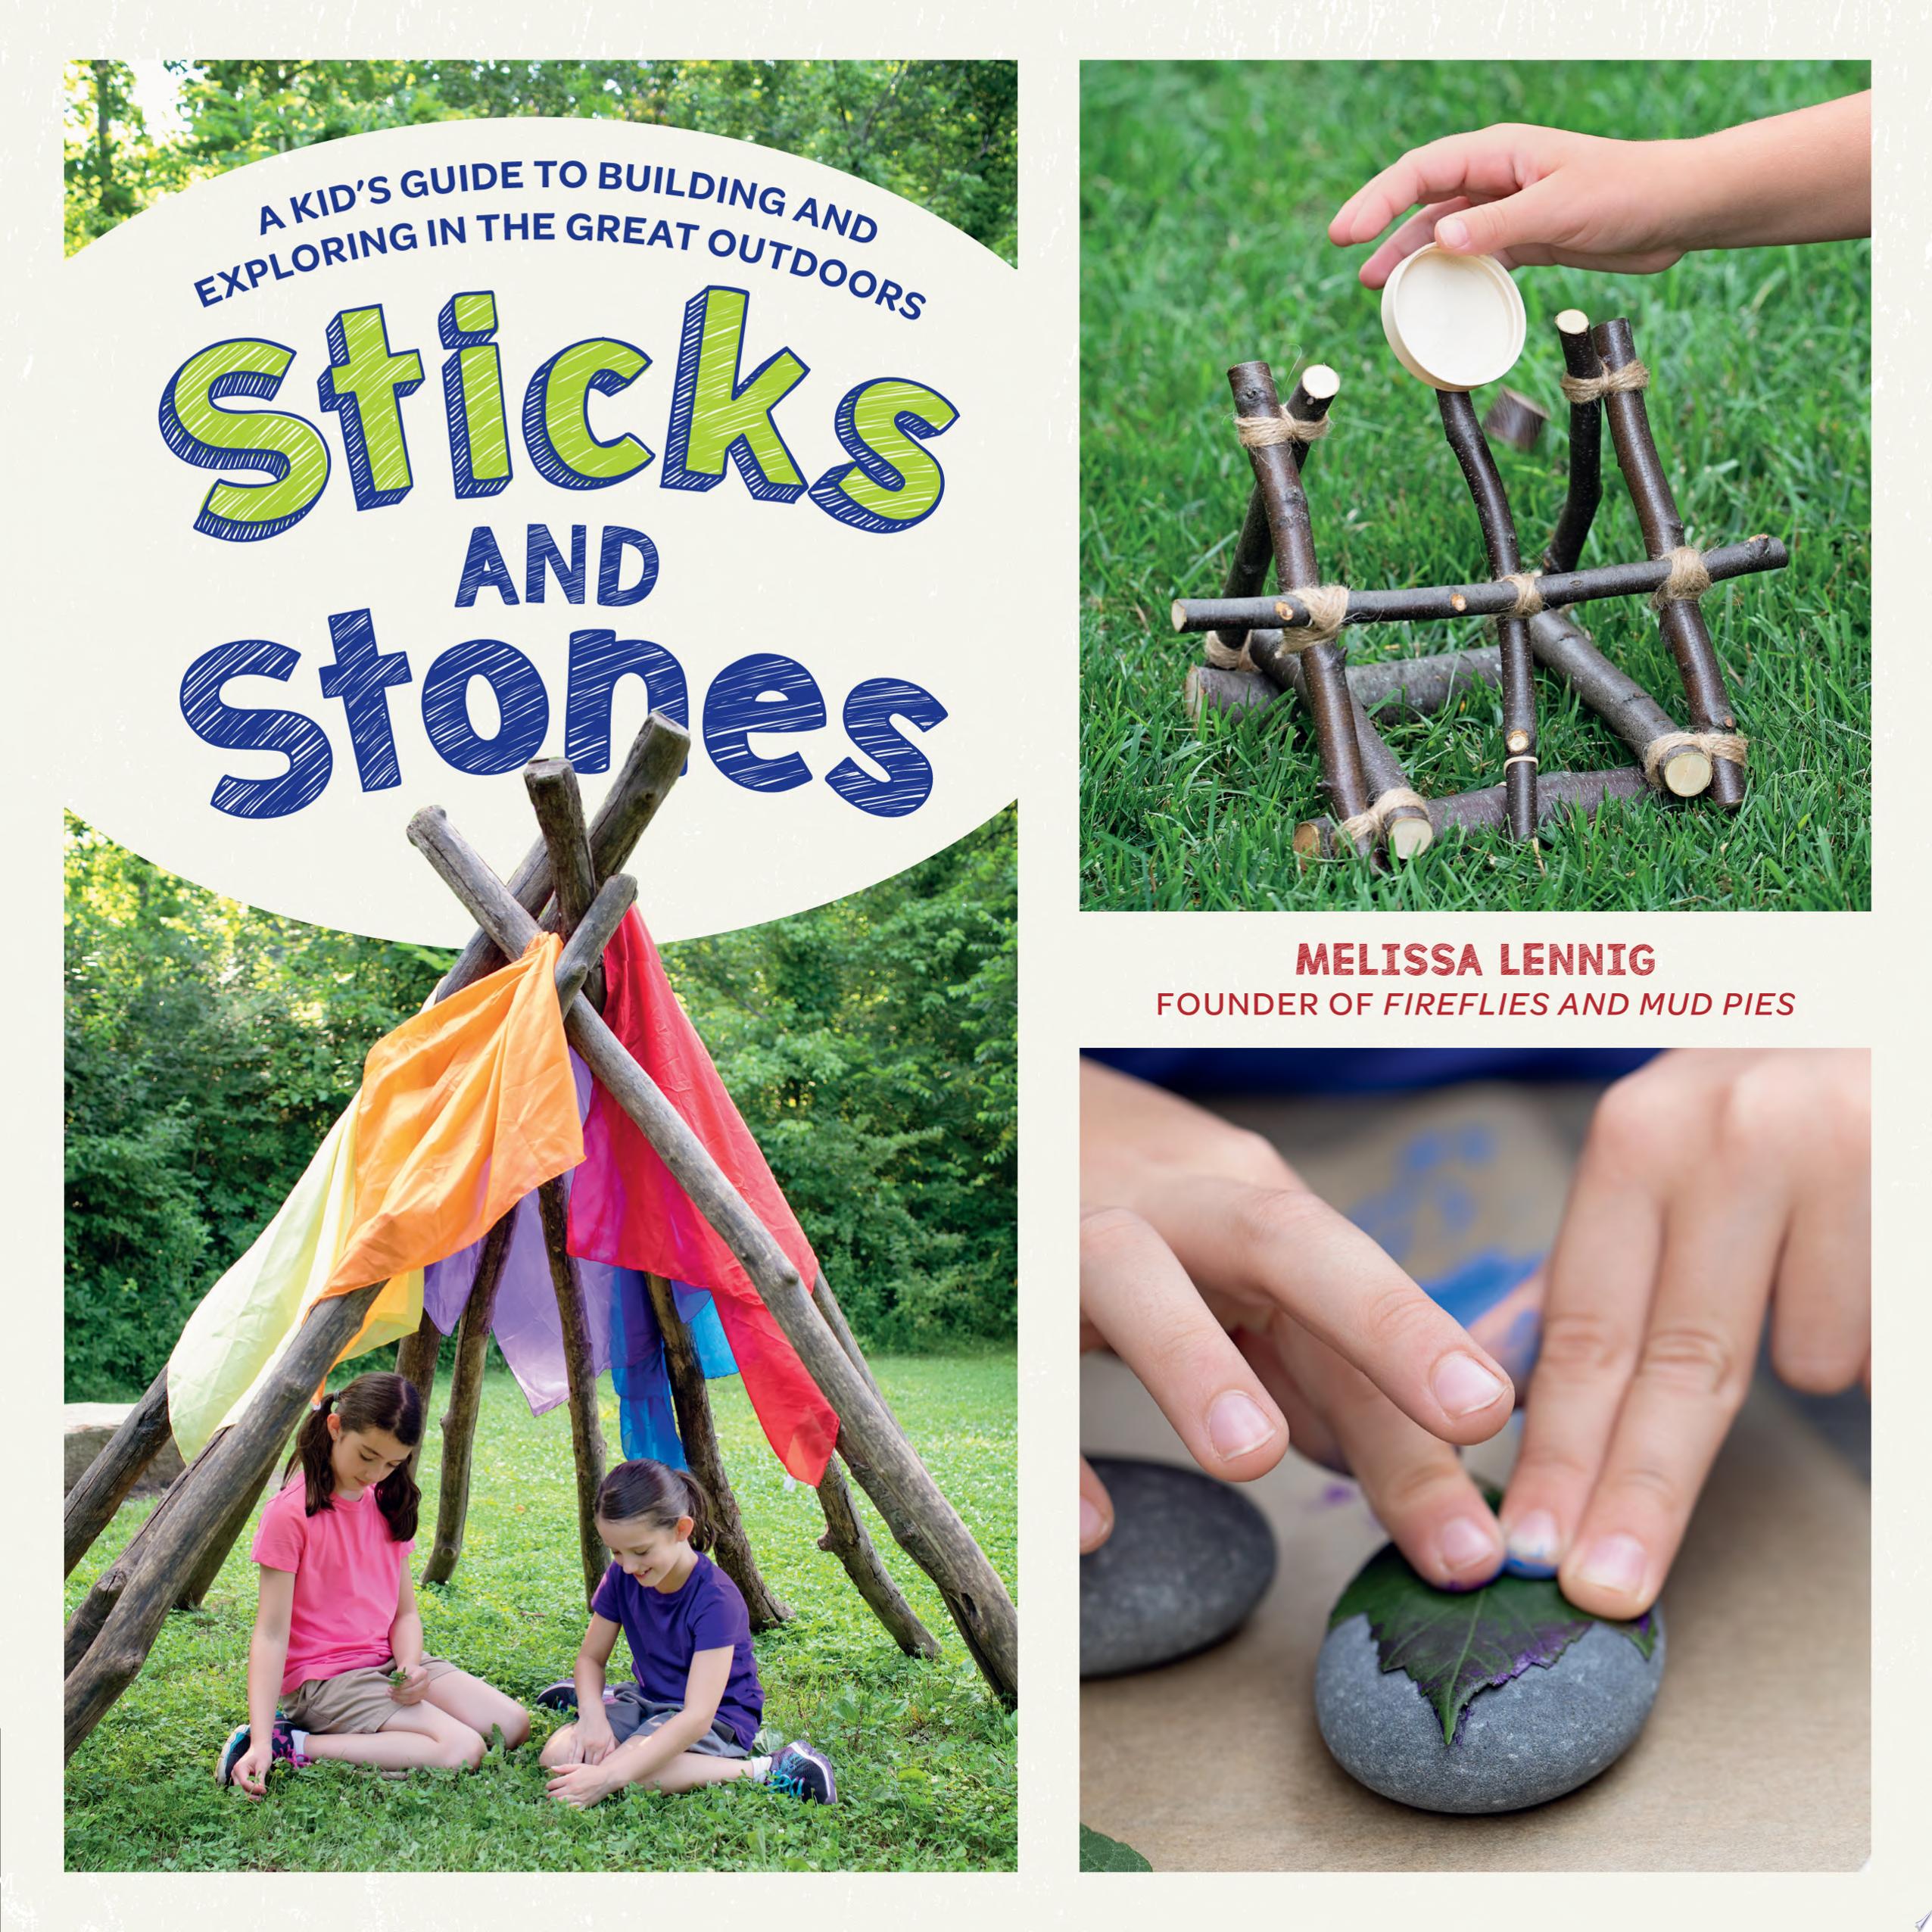 Image for "Sticks and Stones"